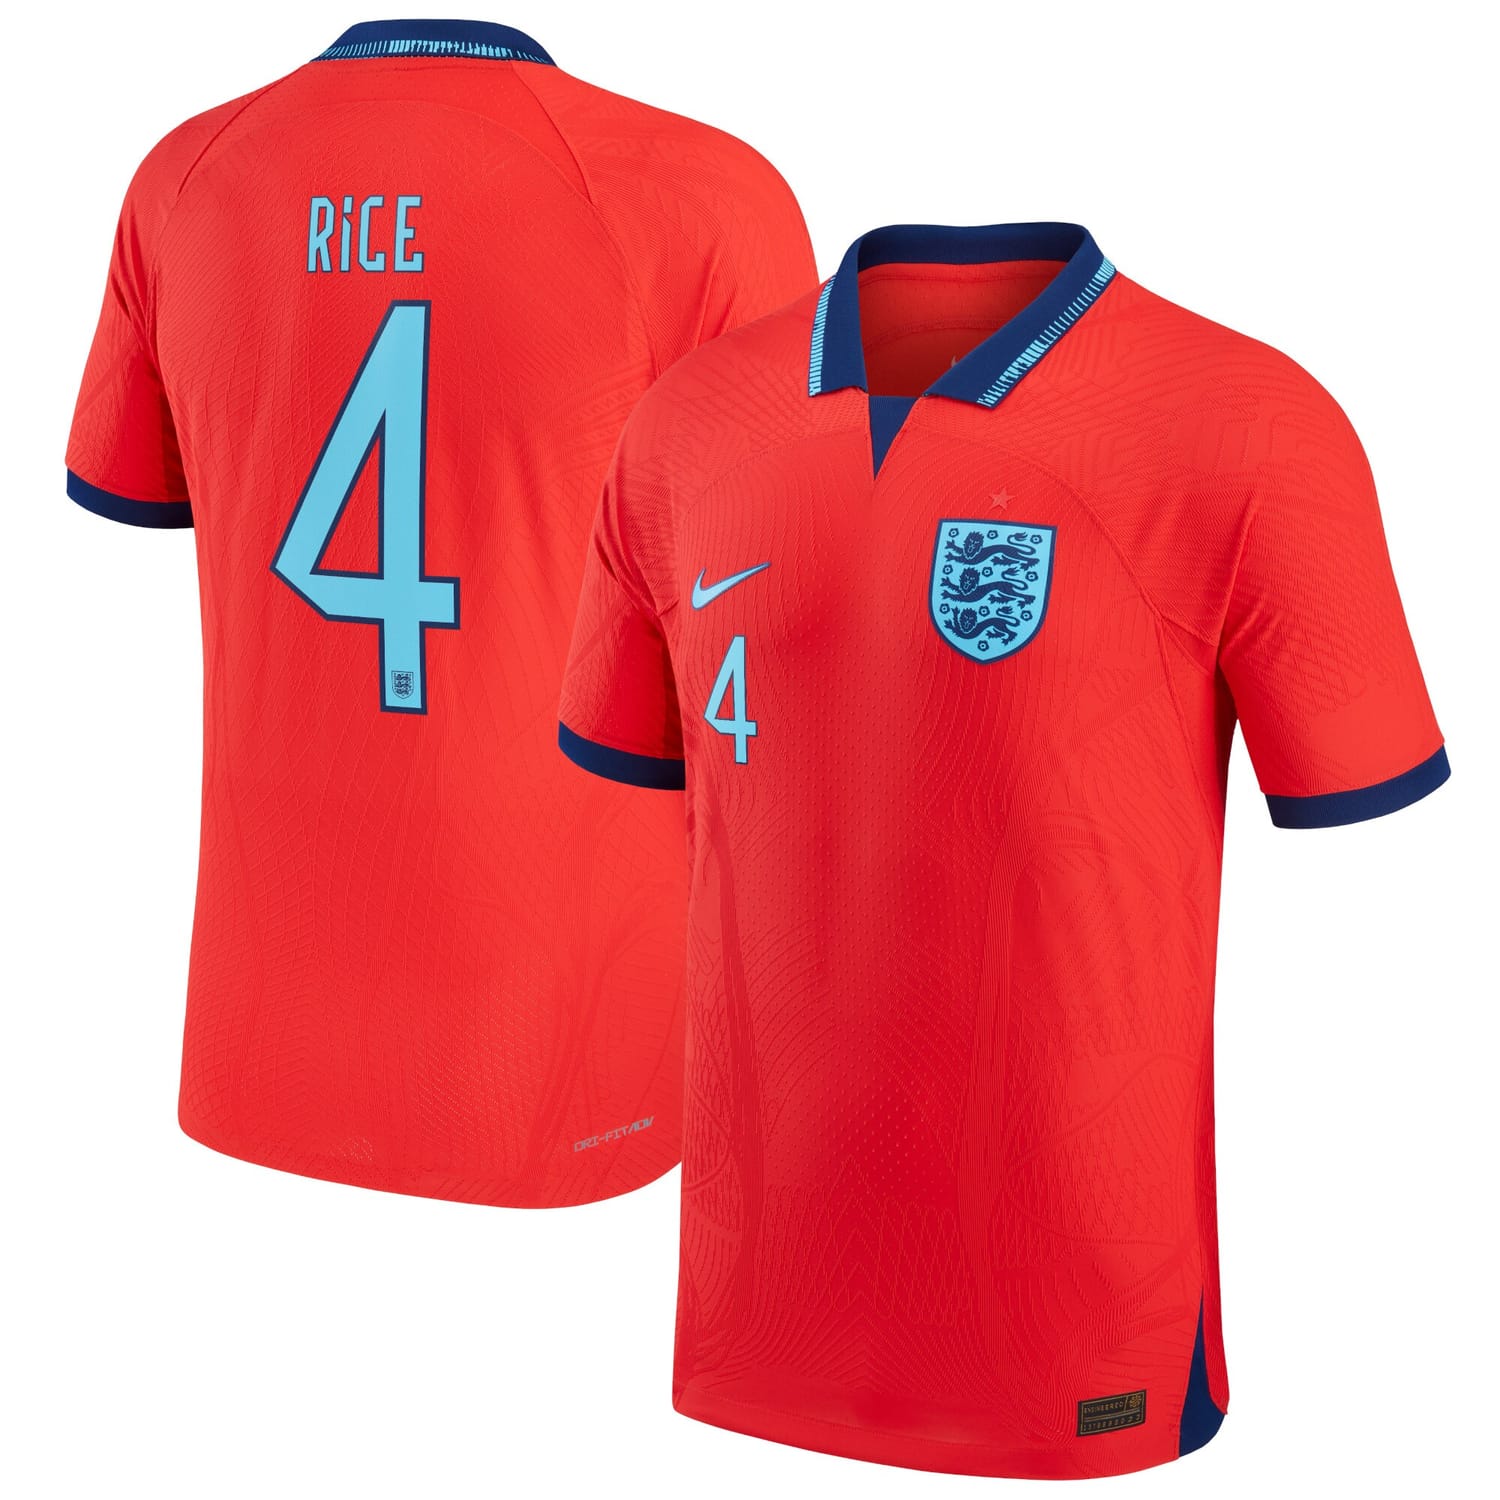 England National Team Away Authentic Jersey Shirt 2022 player Declan Rice 4 printing for Men